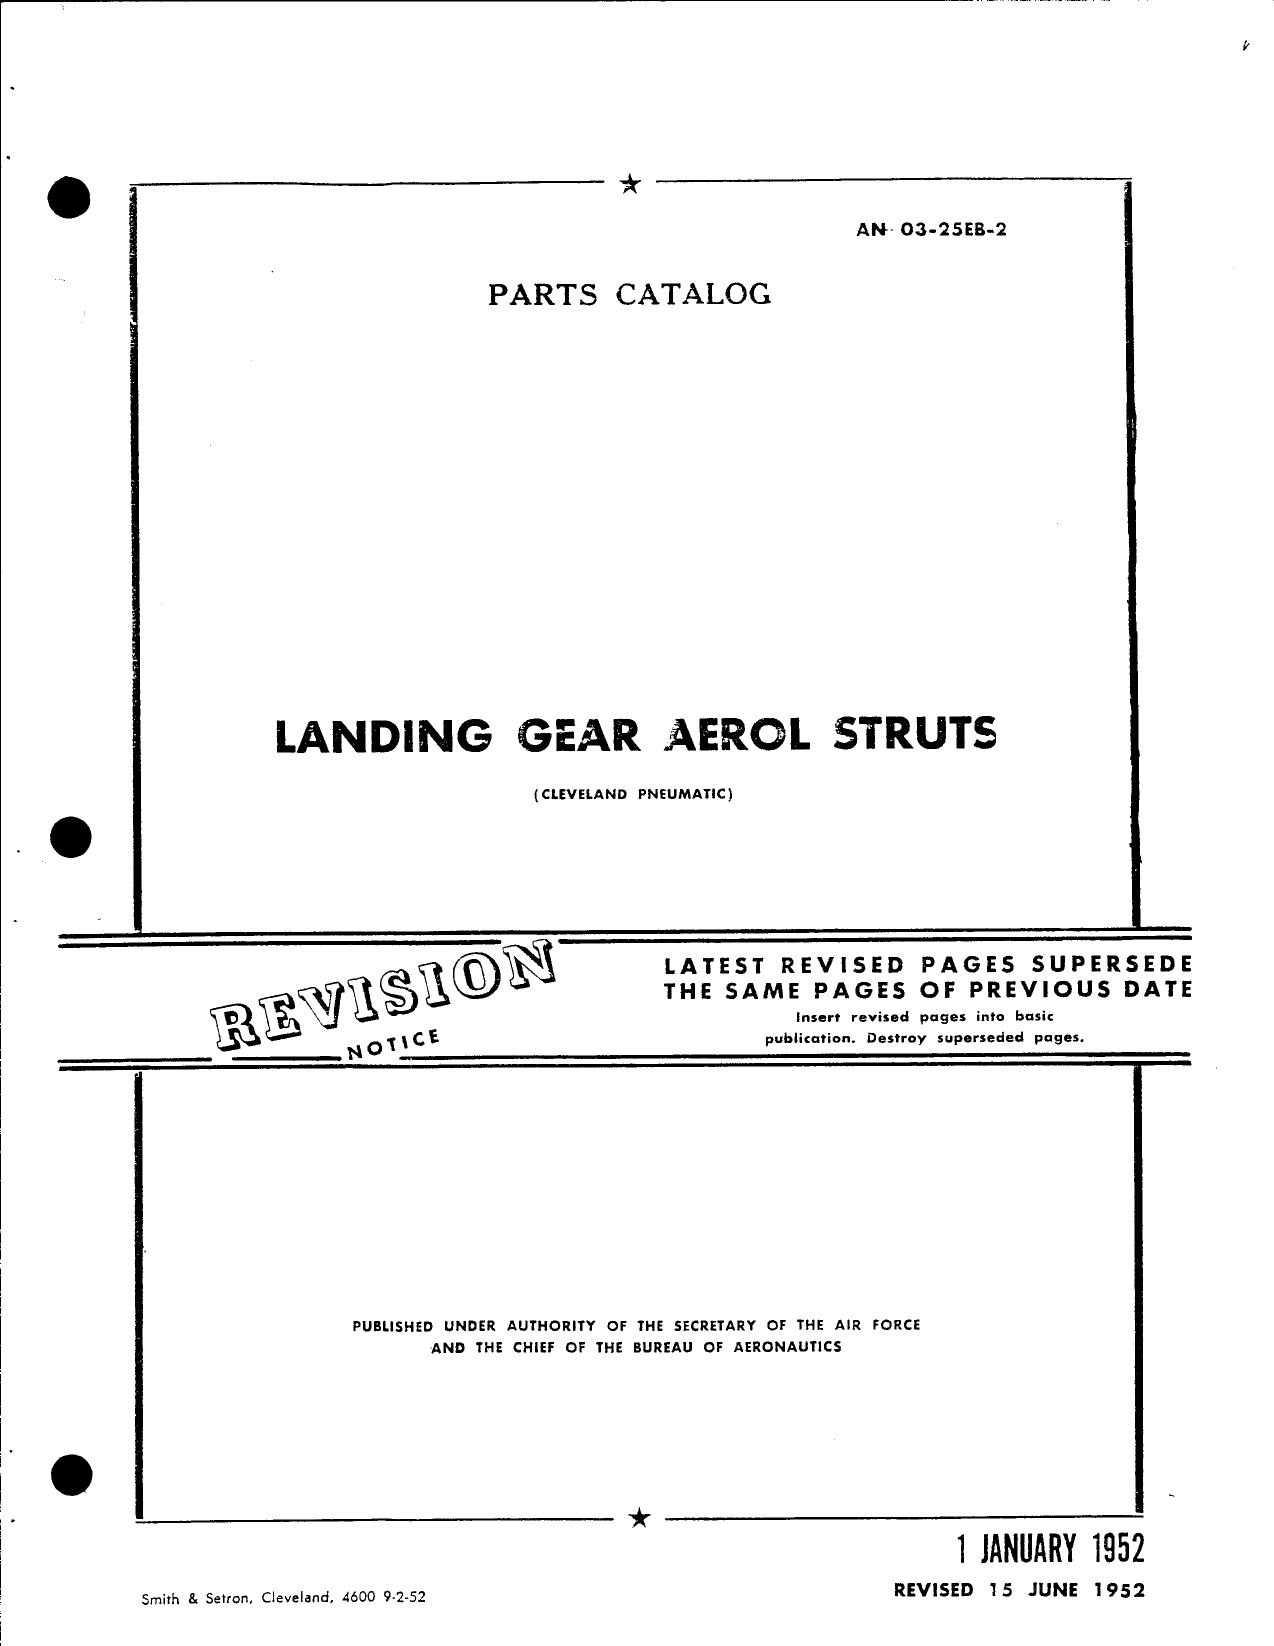 Sample page 1 from AirCorps Library document: Parts Catalog for Landing Gear Aerol Struts